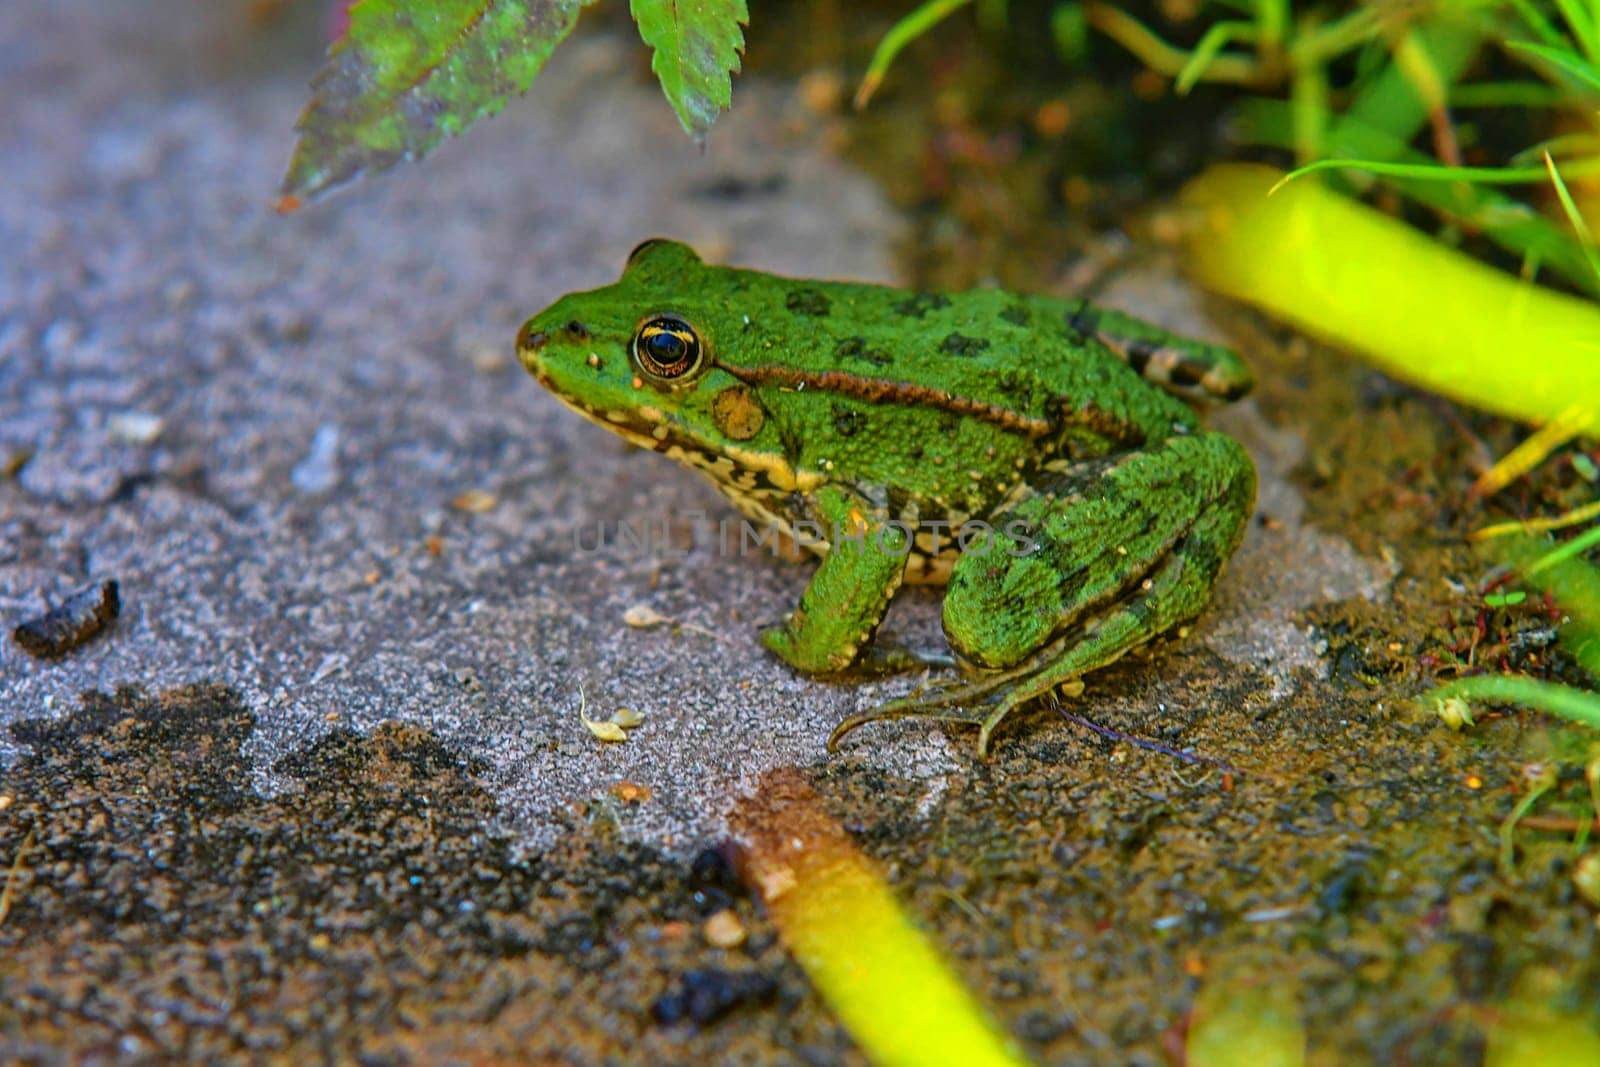 A green edible frog, also known as the Common Water Frog. Adult frog sitting in the grass.